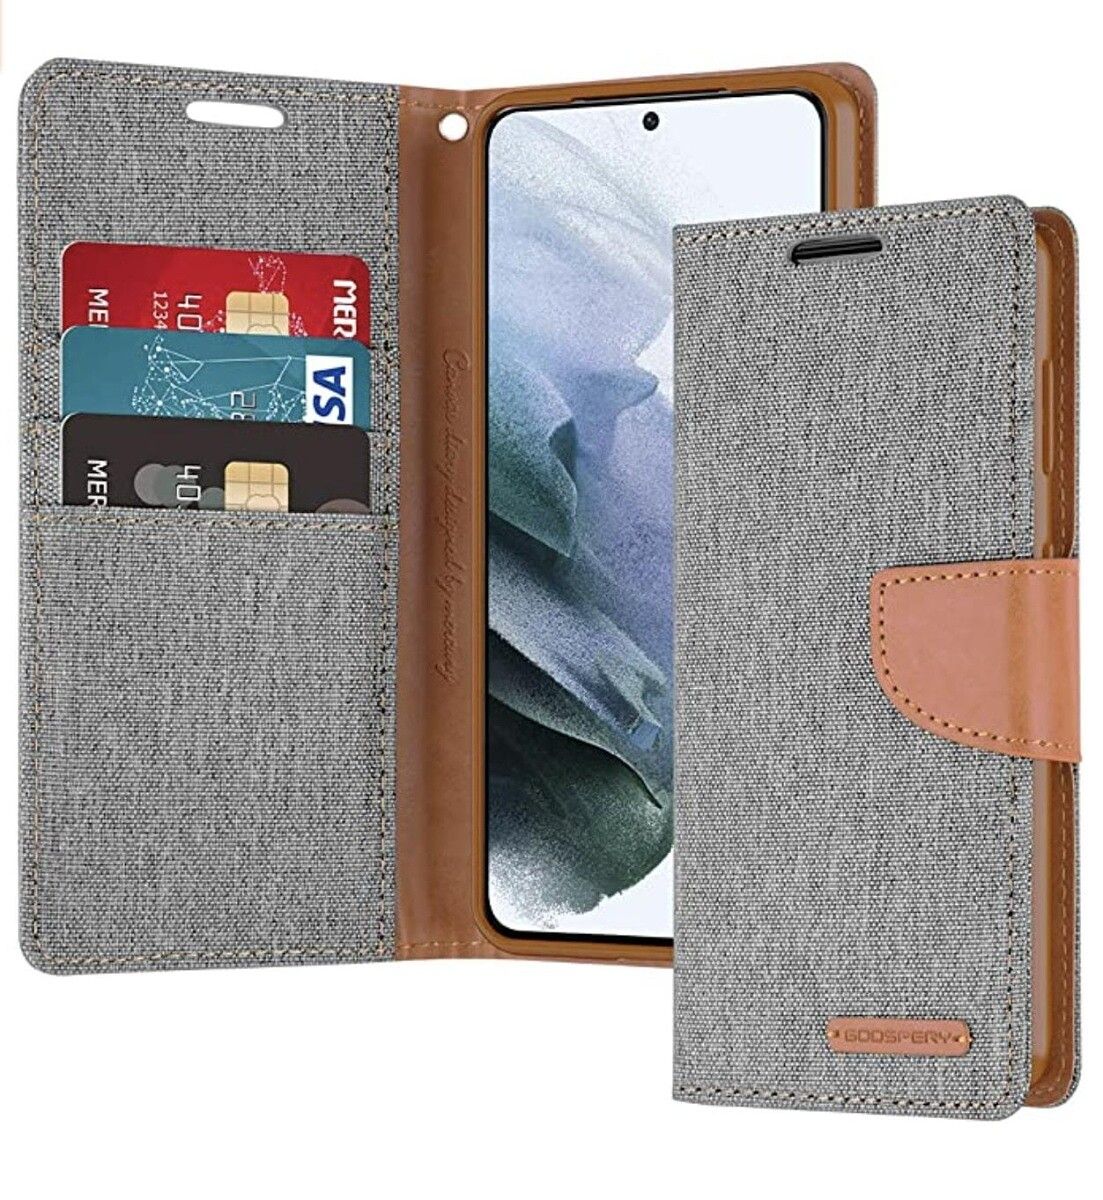 Made from canvas fabric and synthetic leather, the Goospbery Wallet Case looks stylish and offers 360-degree protection for the Galaxy S21. It has an inner TPU case, a stand function, an earpiece cutout, credit card slots, a cash pocket, and wireless charging support.